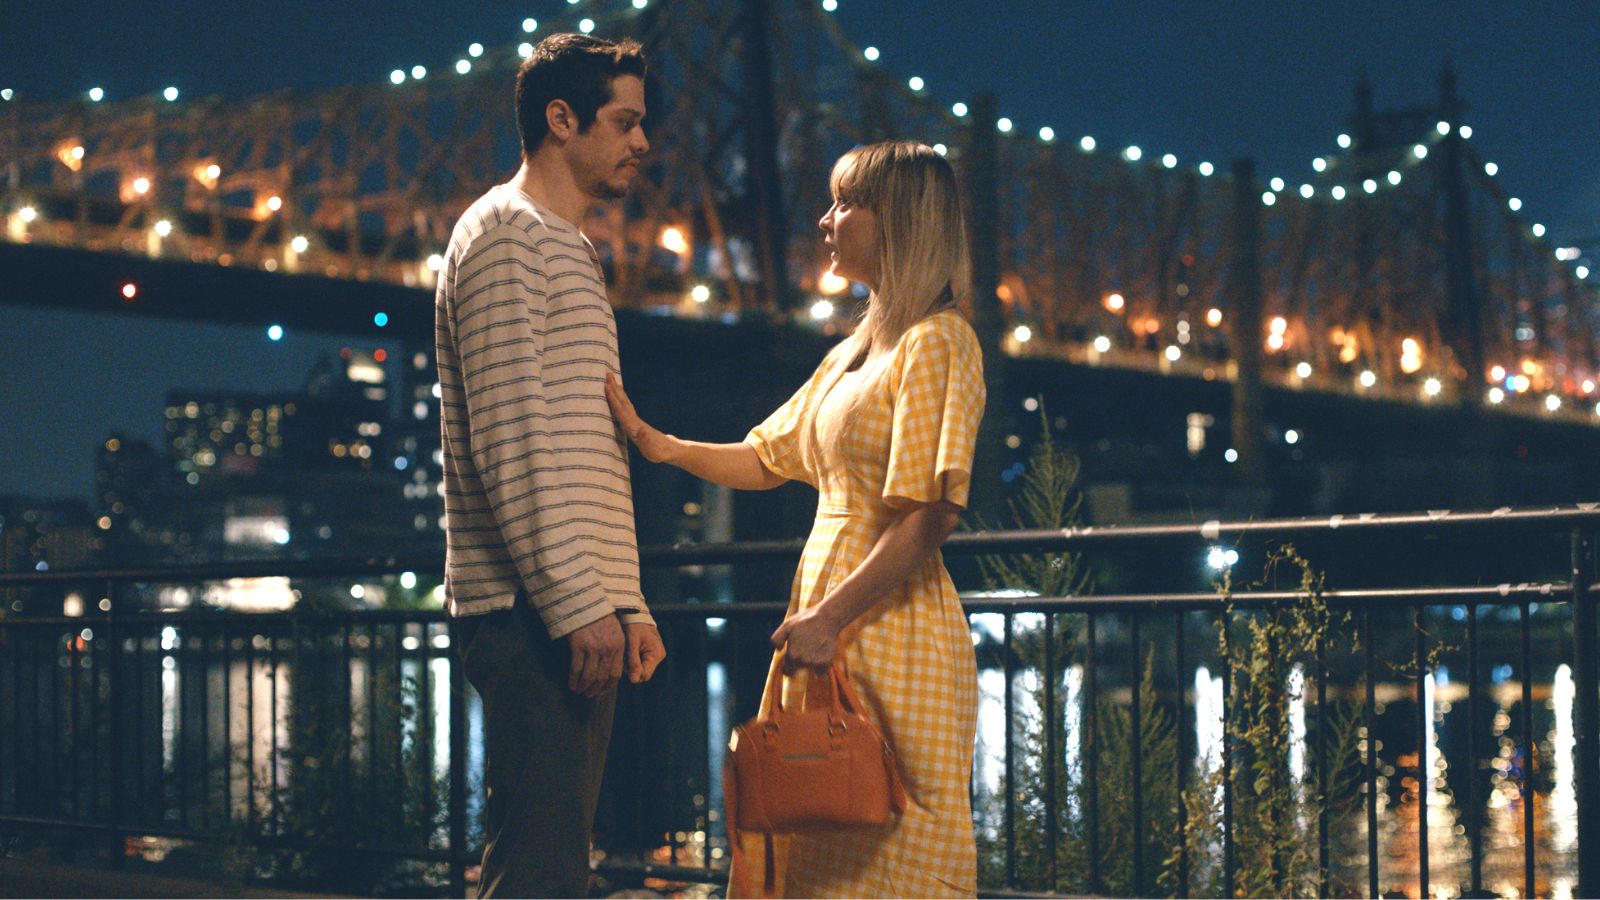 'Meet Cute' director talks brilliantly about Kaley Cuoco and Pete Davidson